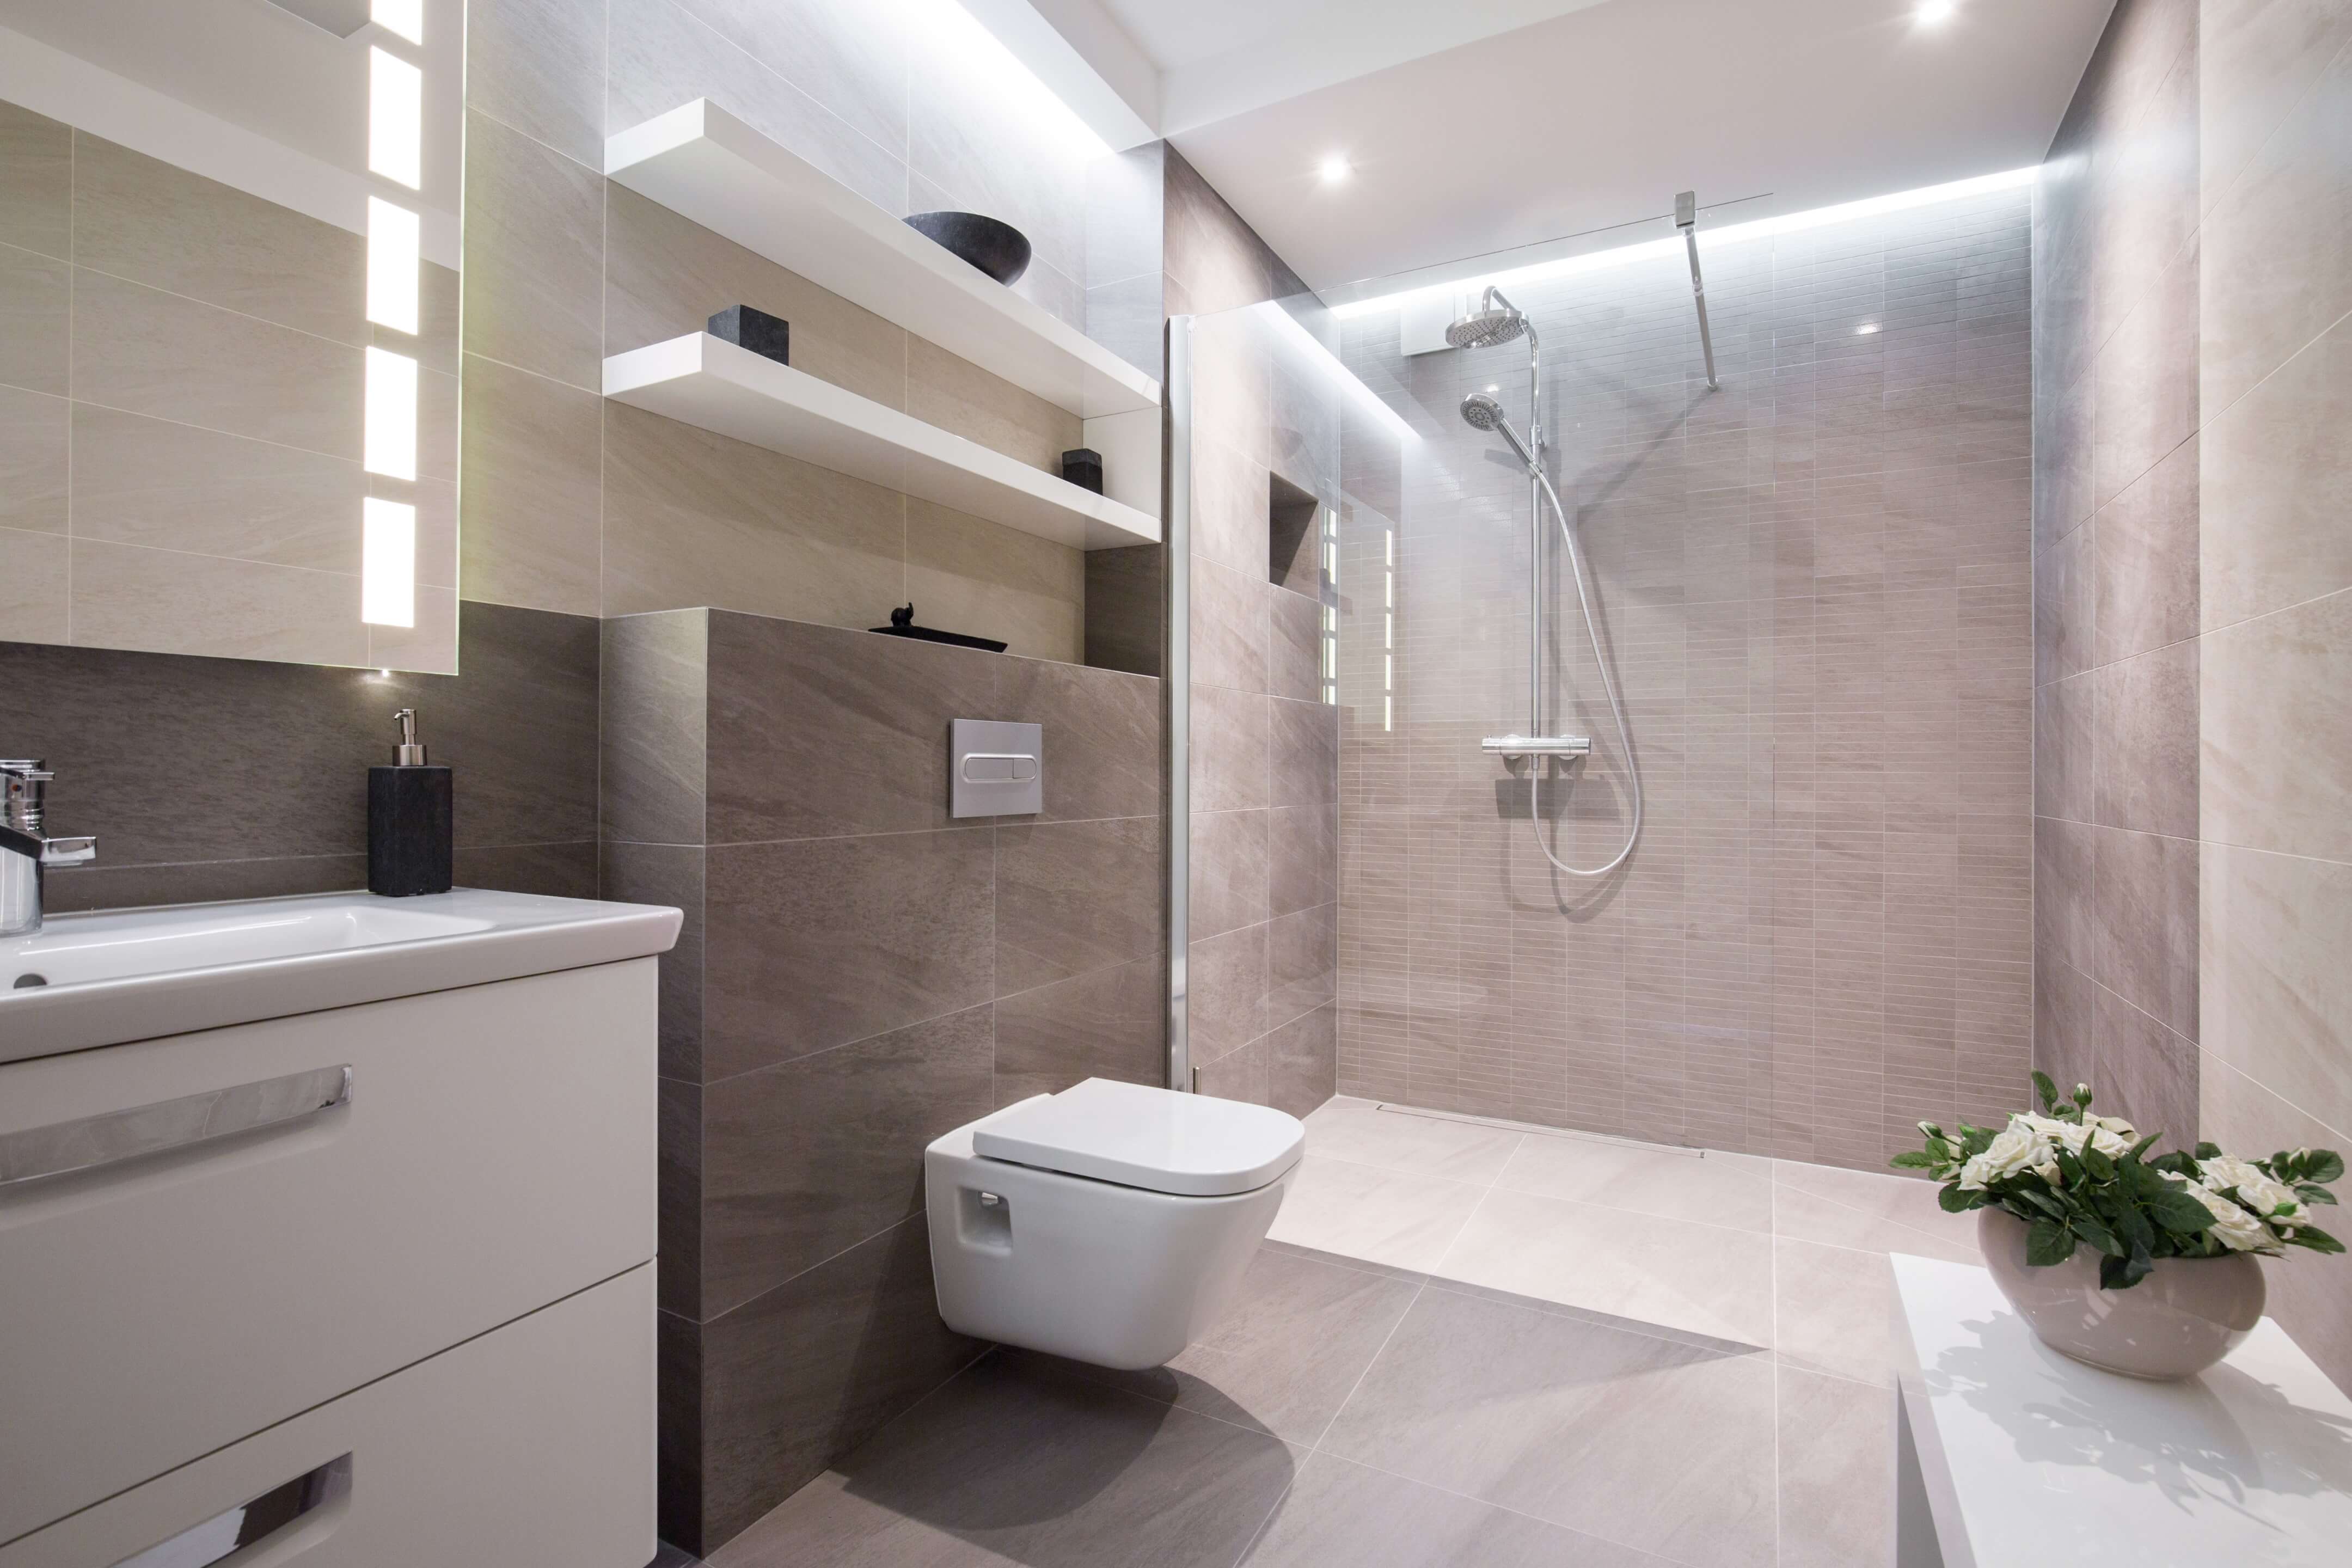 local bathroom fitters chelmsford